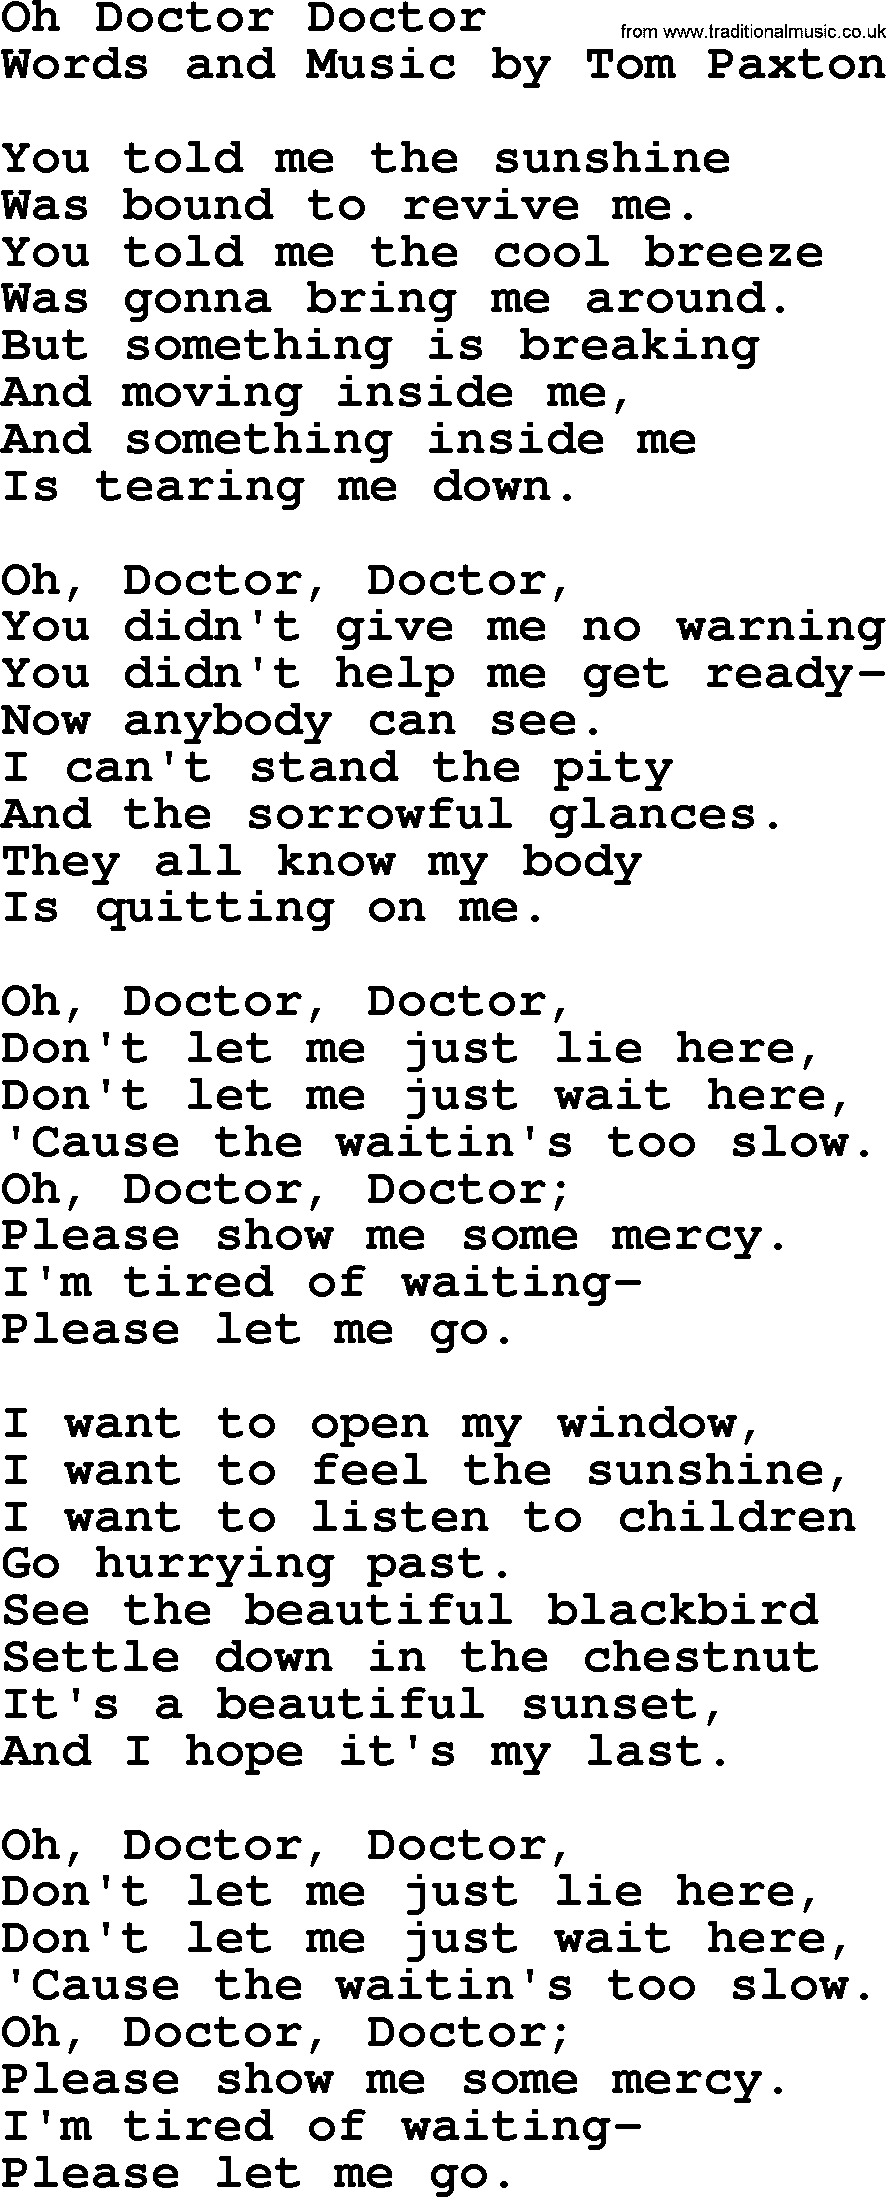 Tom Paxton song: Oh Doctor Doctor, lyrics